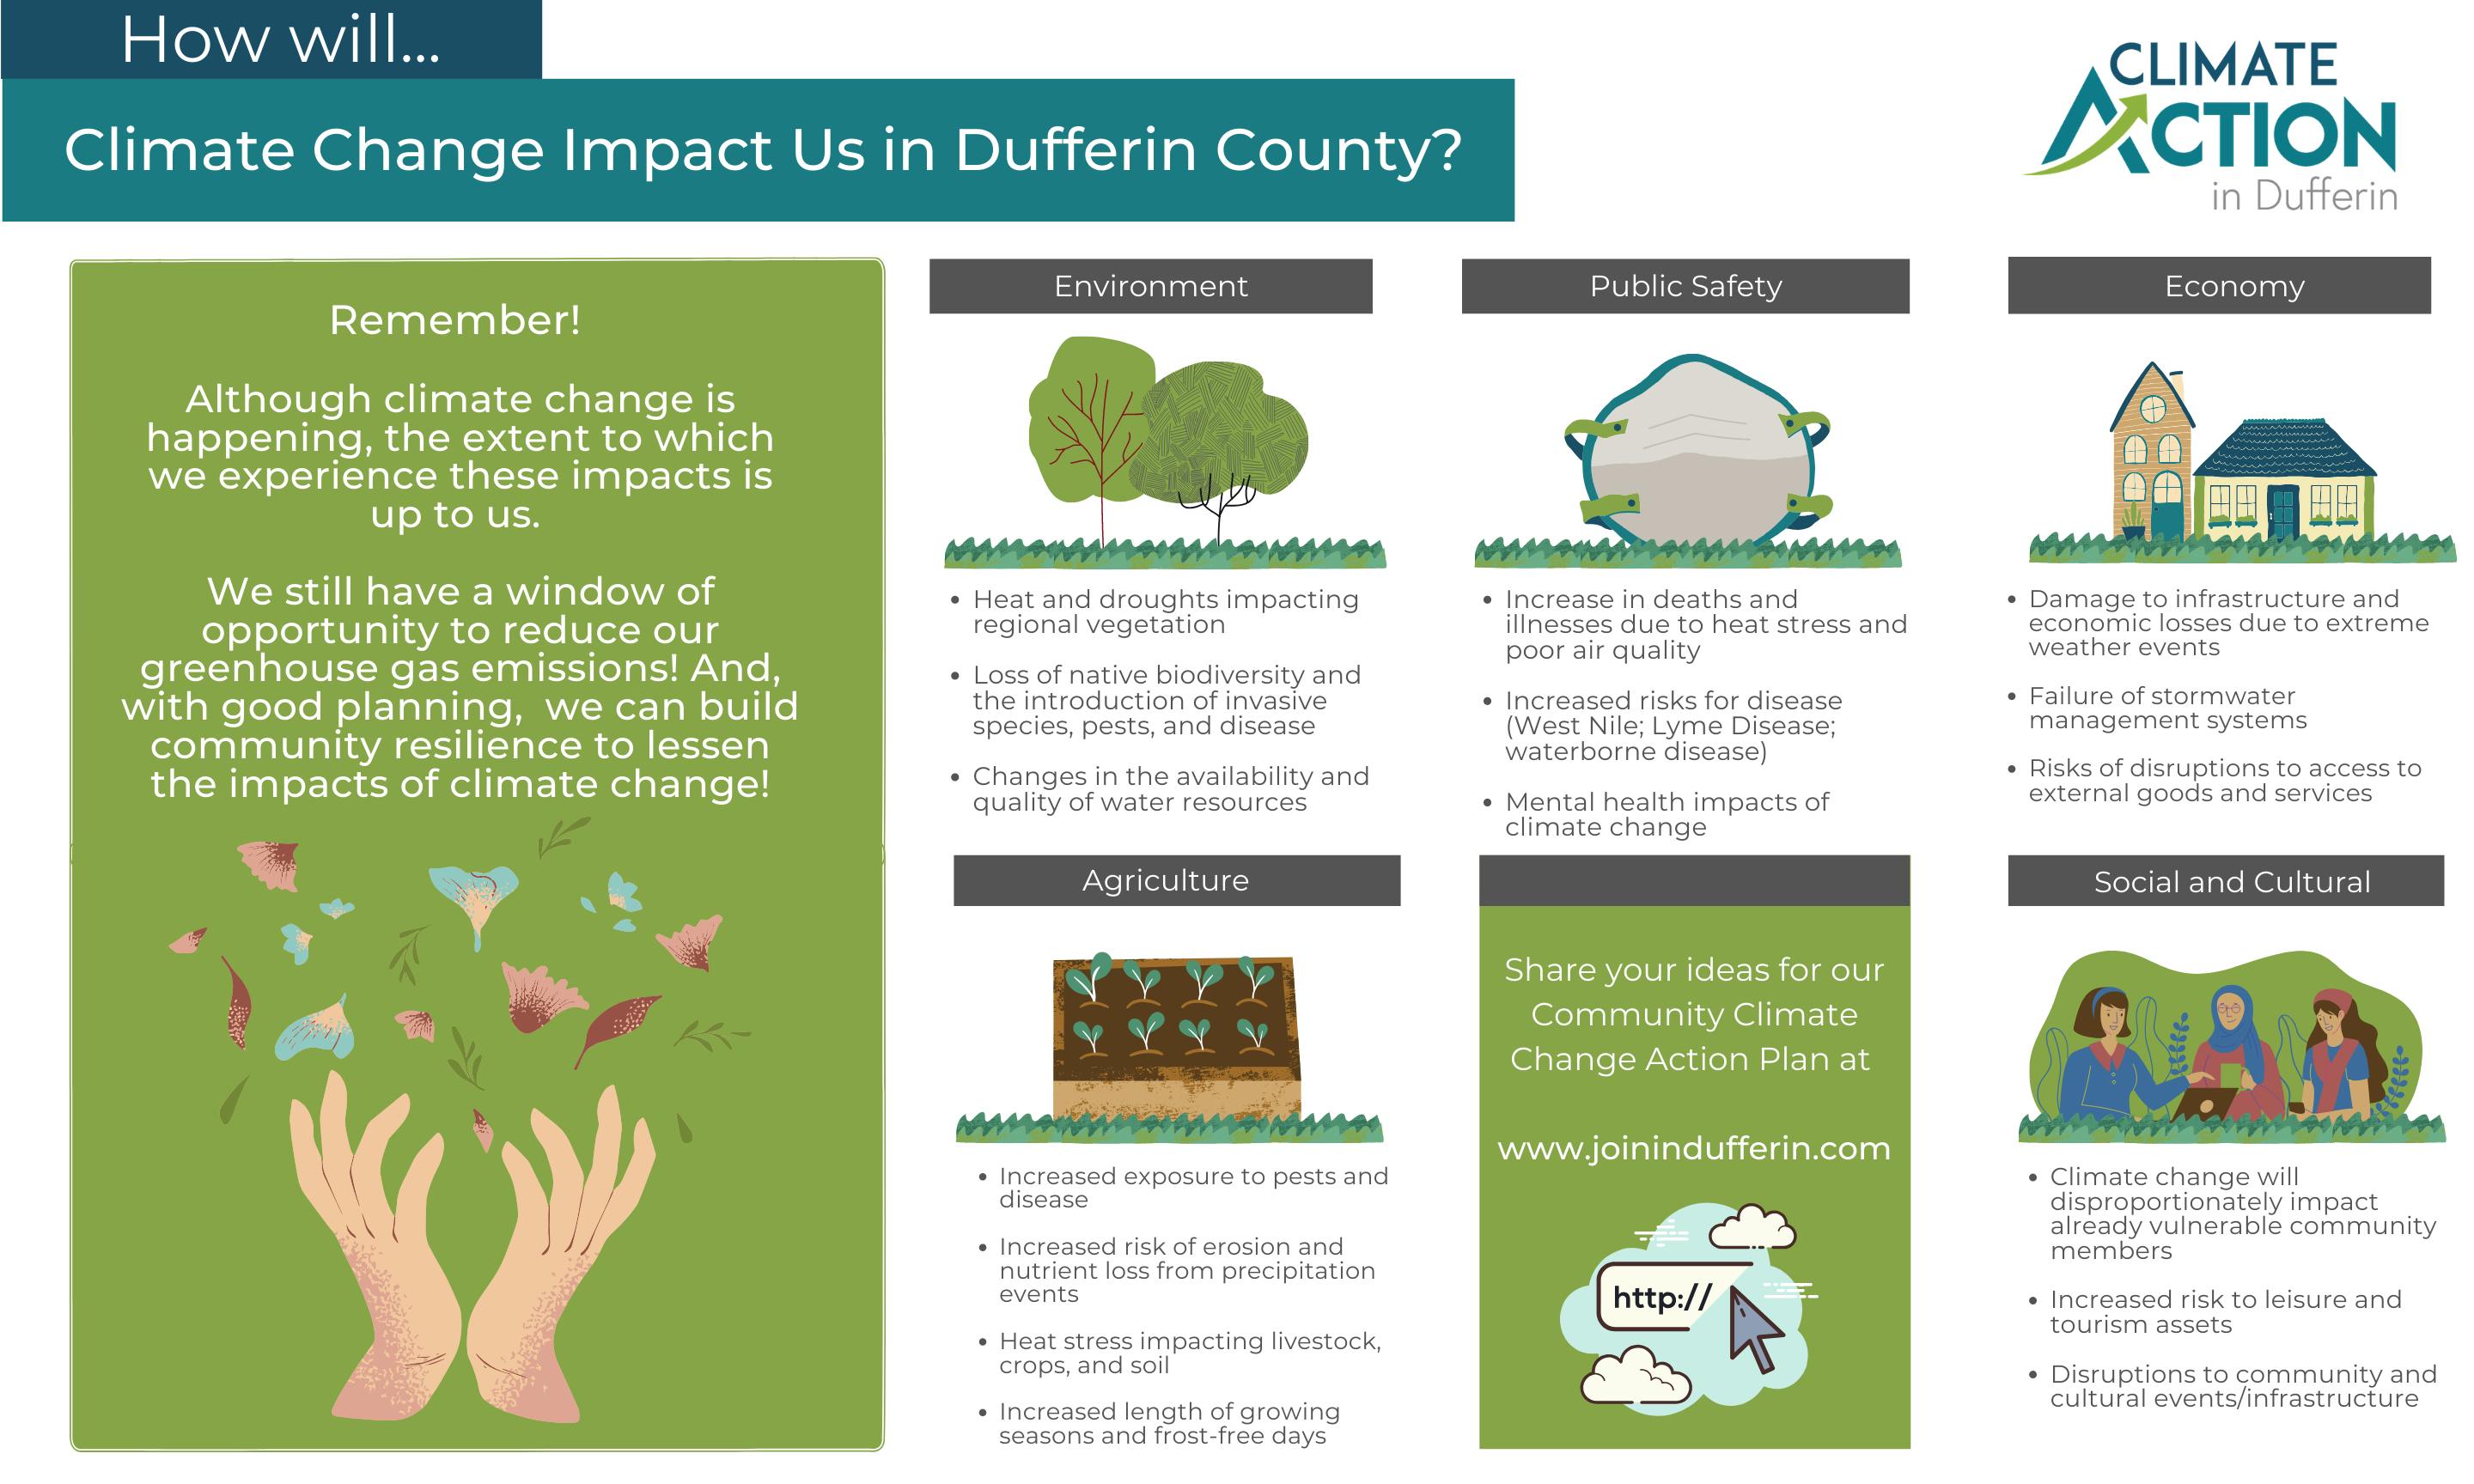 How will climate change impact us in Dufferin County? 